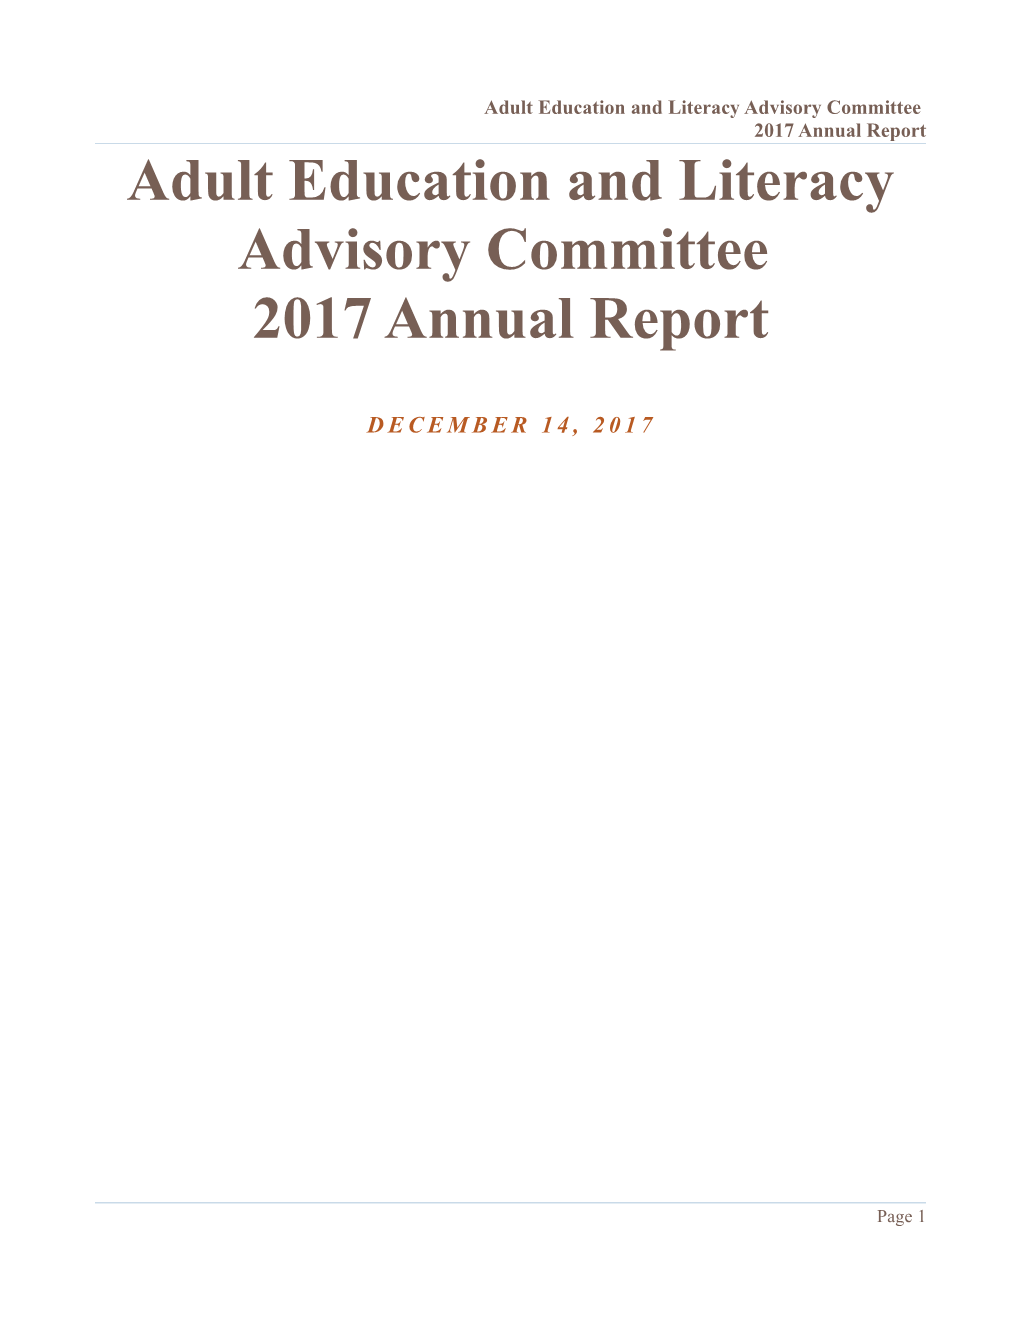 Adult Education and Literacy Advisory Committee 2017 Annual Report